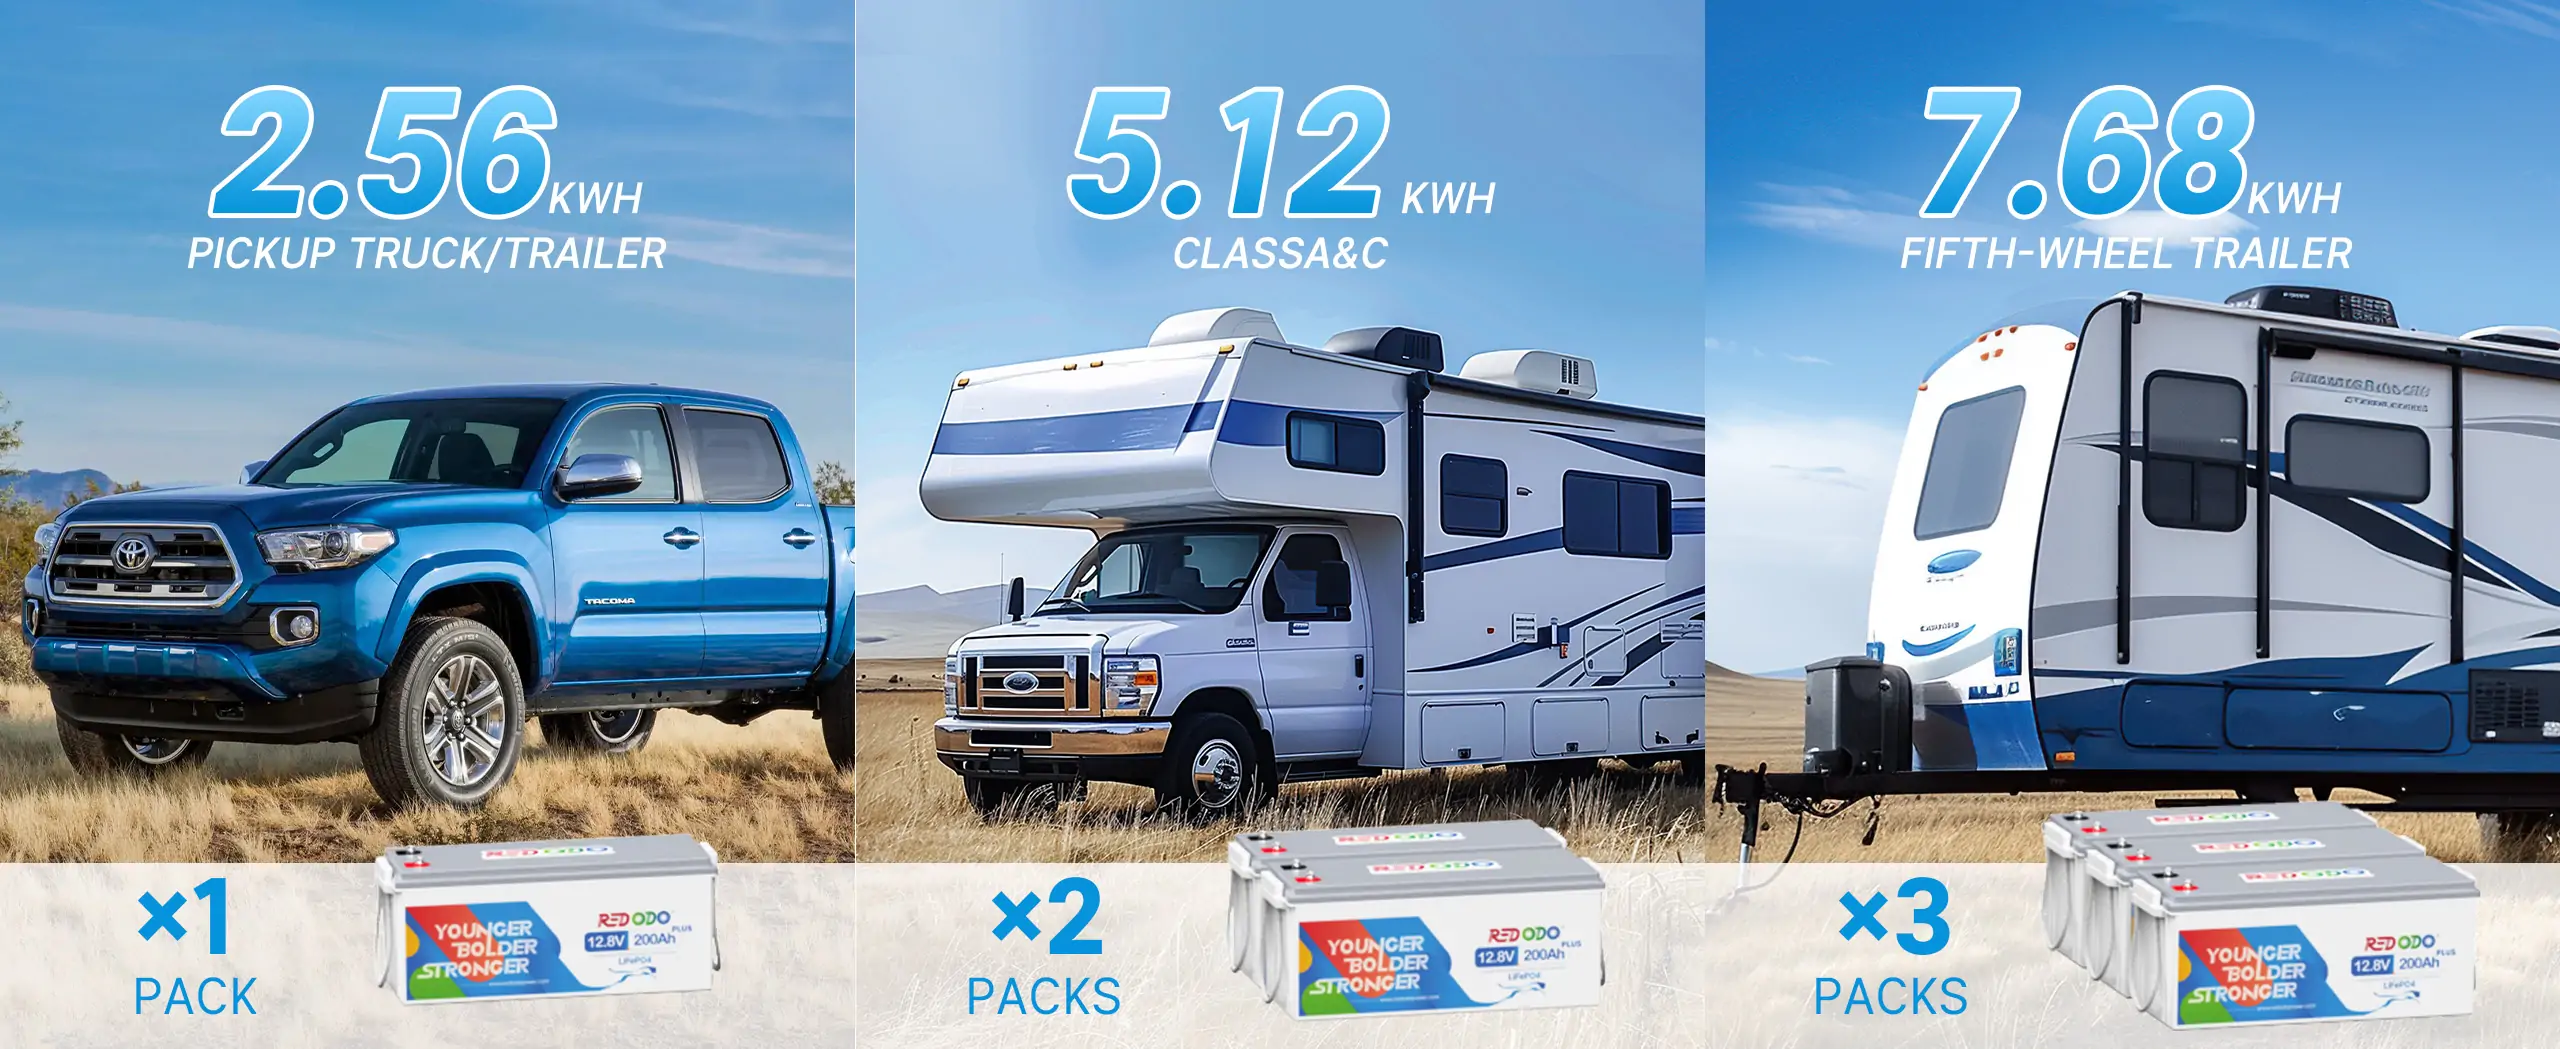 Redodo lithium ion batteries for rv